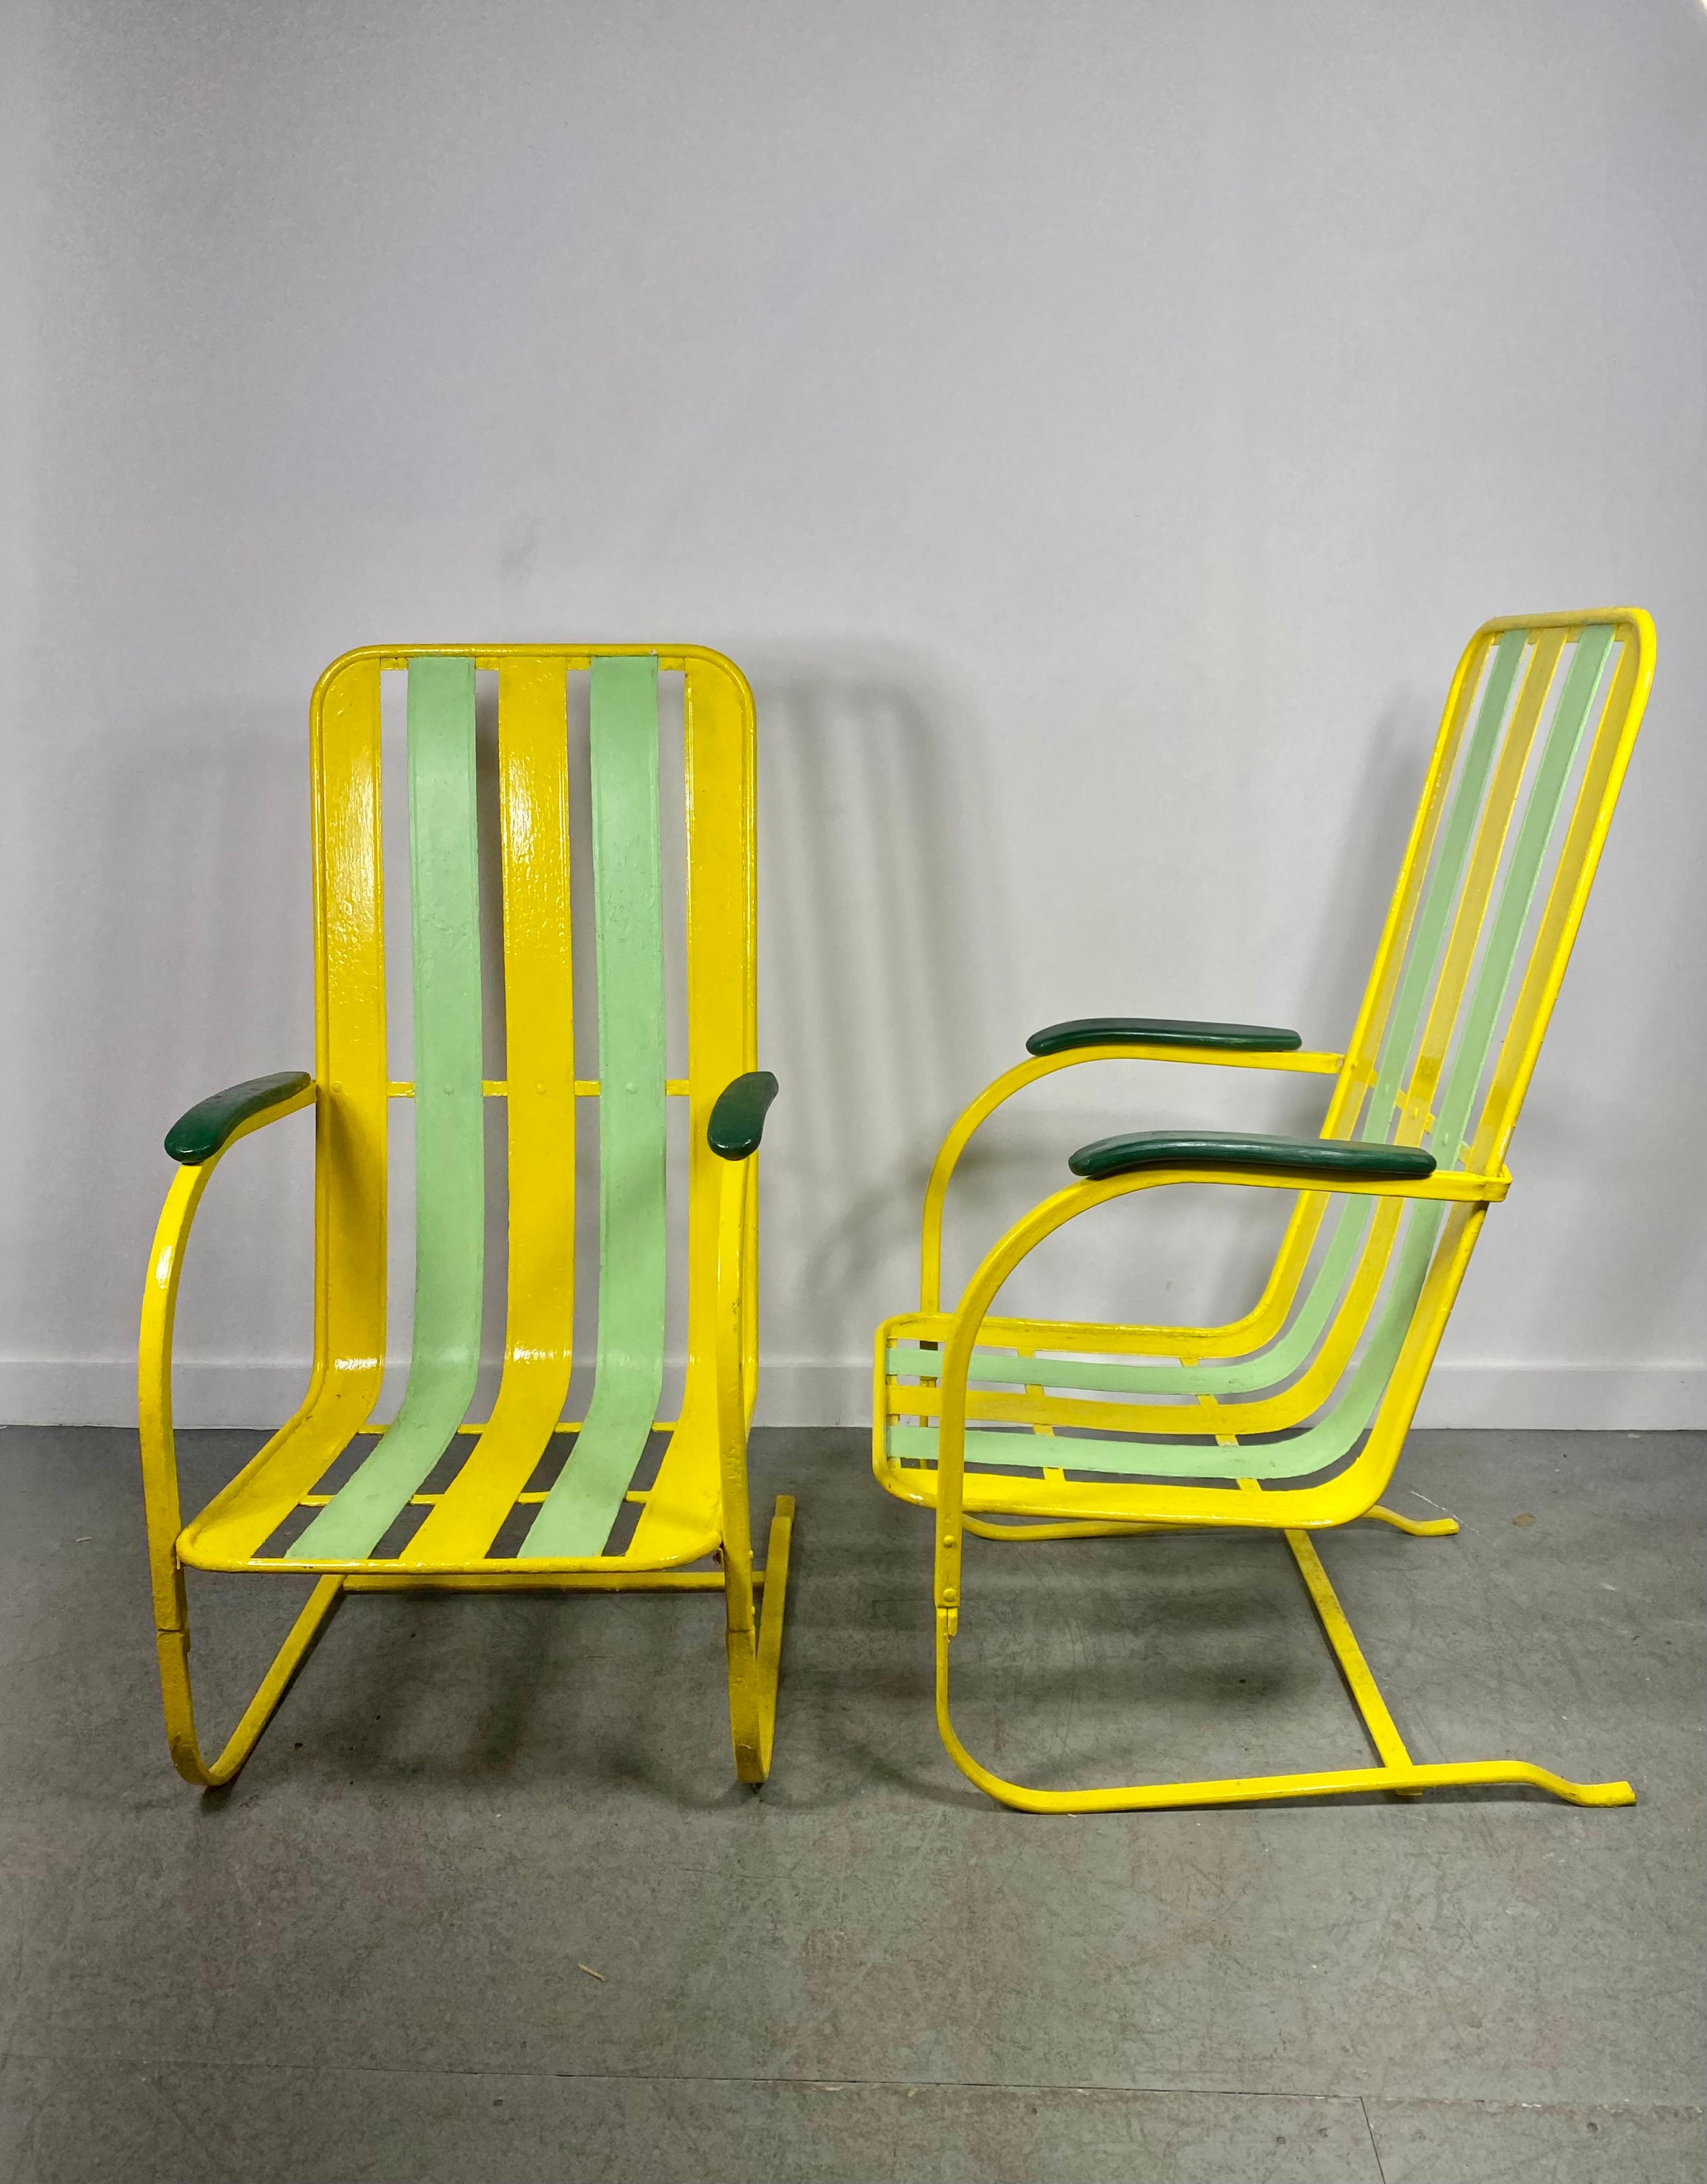 Classic Pair Art Deco High Back Slatted Spring Steel Lounge Chairs attributed to Lloyd Loom designed by Kem Weber.. Super stylish.. Amazing design,, Repainted at some point in fun ,whimsical colors..Extremely comfortable,, Hand delivery avail to New